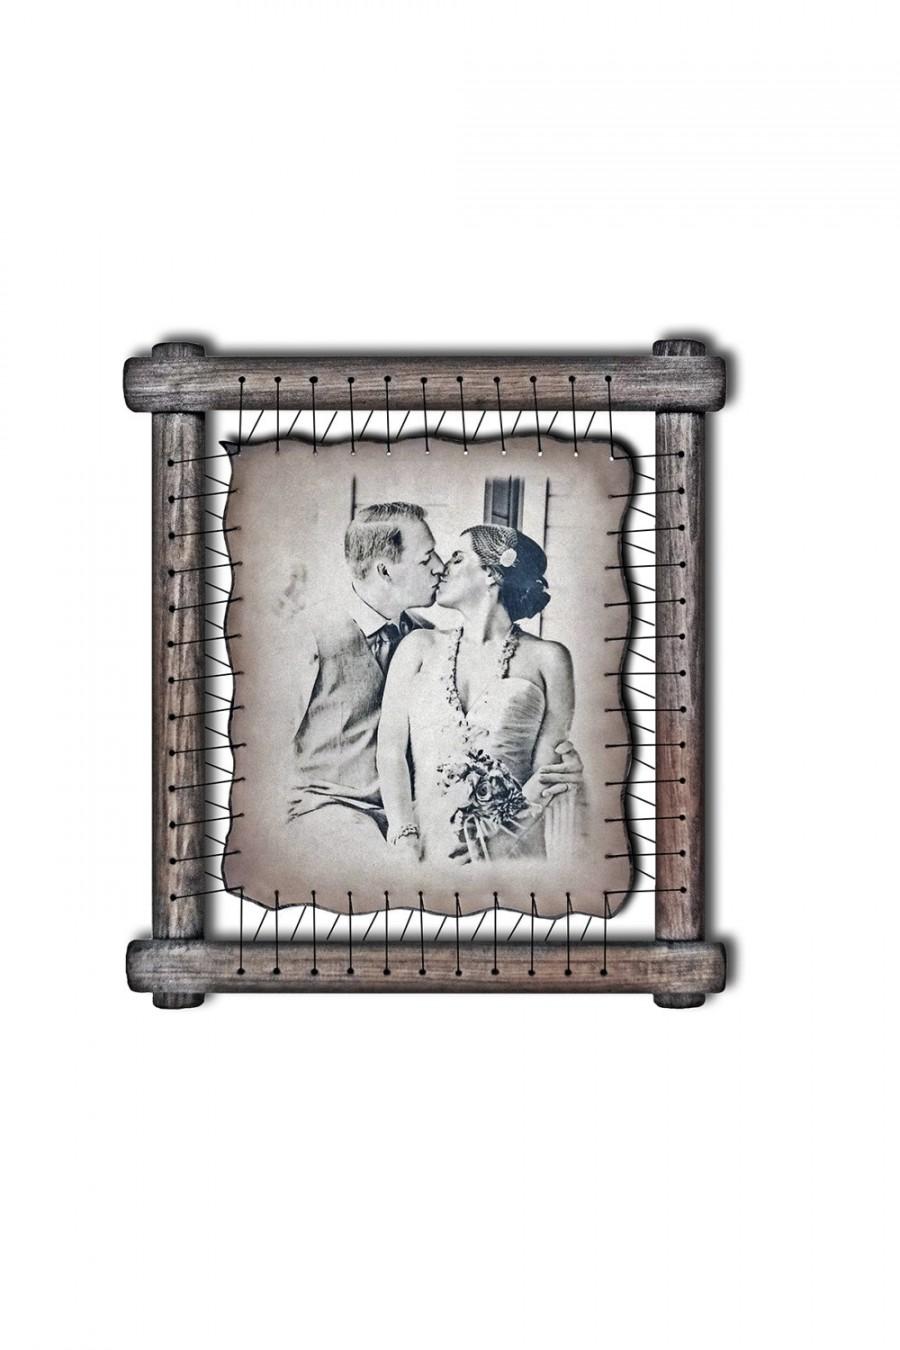 Wedding - Wedding Anniversary Gifts For Husband Leather Personalised Portrait From Photo 3rd Wedding Anniversary Greetings For Wife Presents For Her